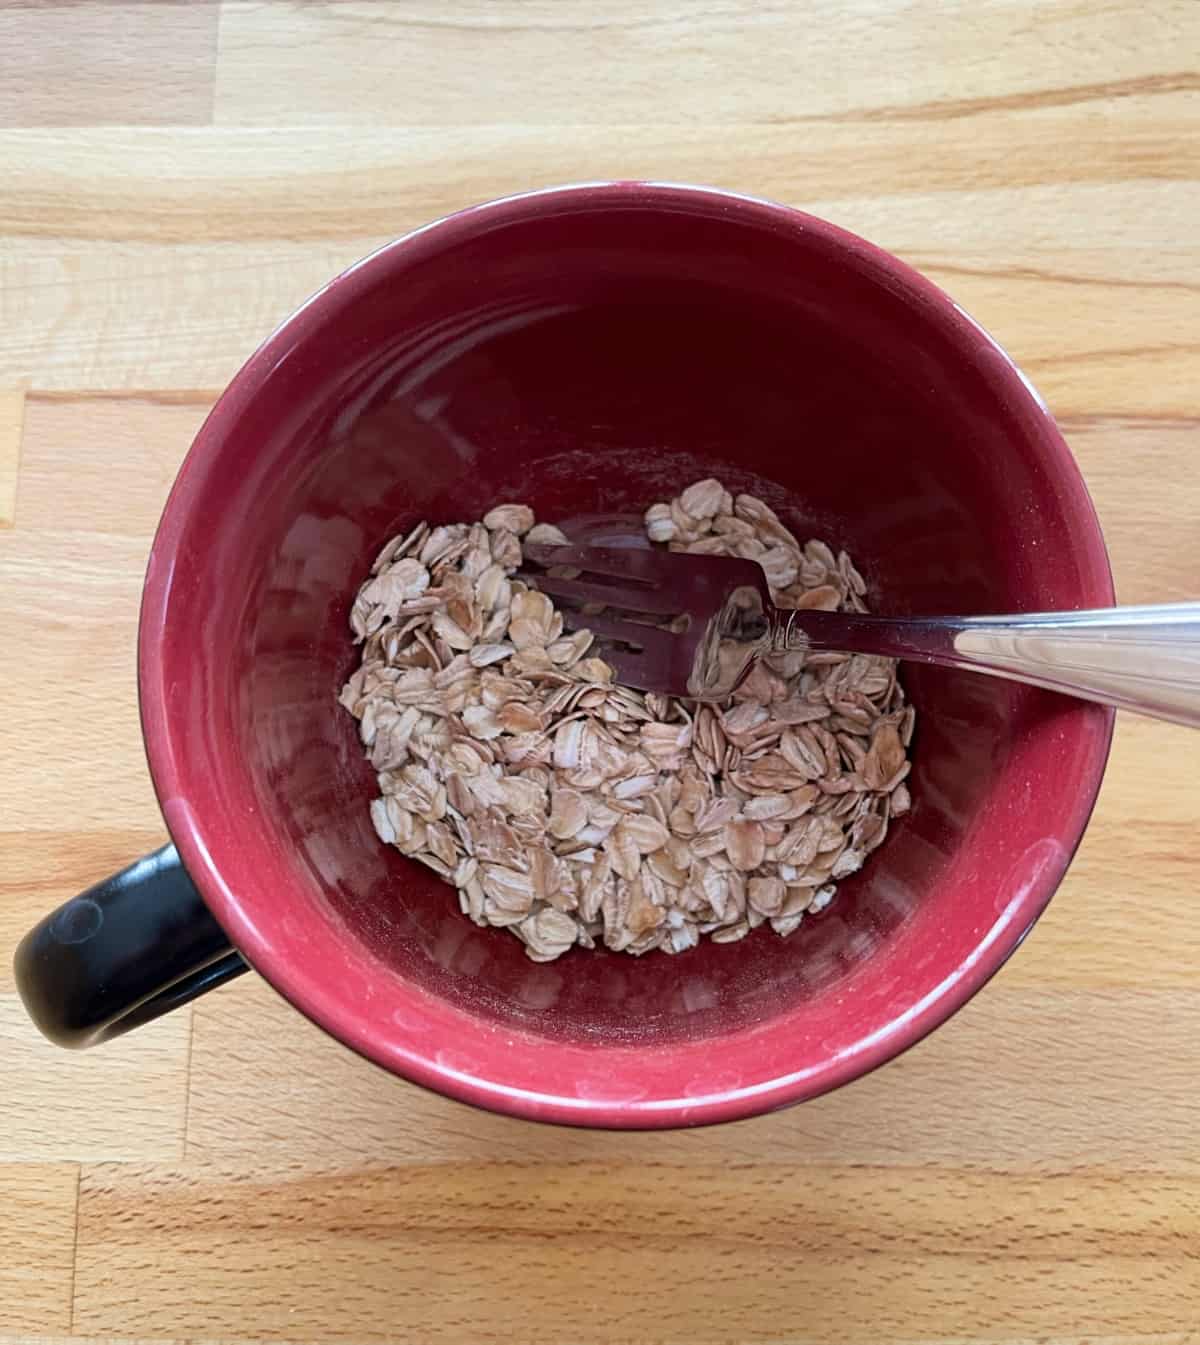 Mixing rolled oats, cinnamon and baking powder in red mug with fork.